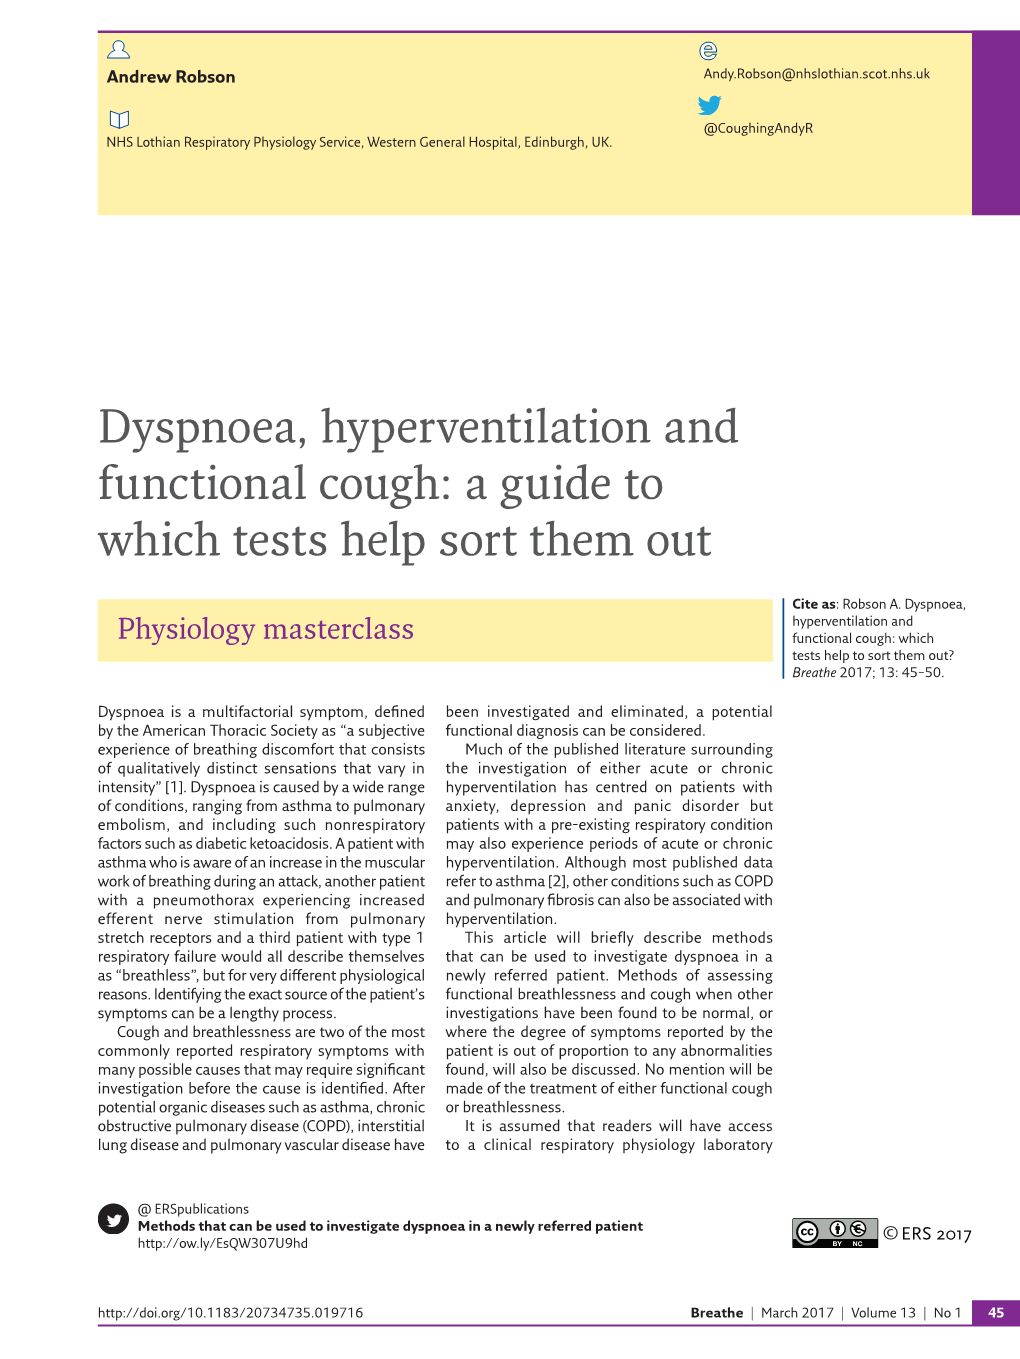 Dyspnoea, Hyperventilation and Functional Cough: a Guide to Which Tests Help Sort Them Out